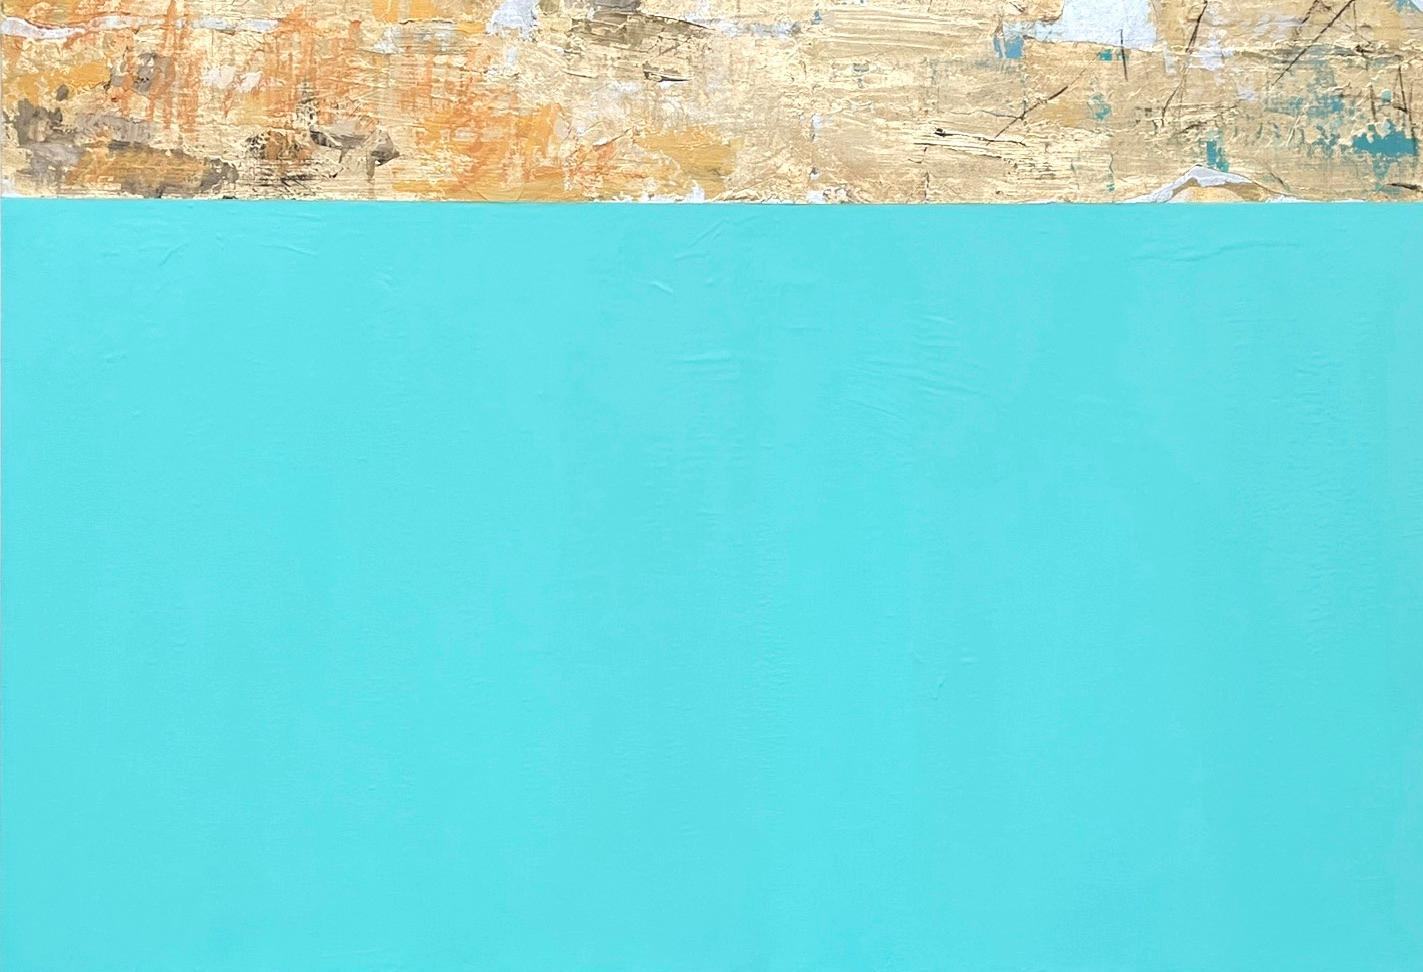 Gold and Turquoise No. 6 - Painting by Takefumi Hori